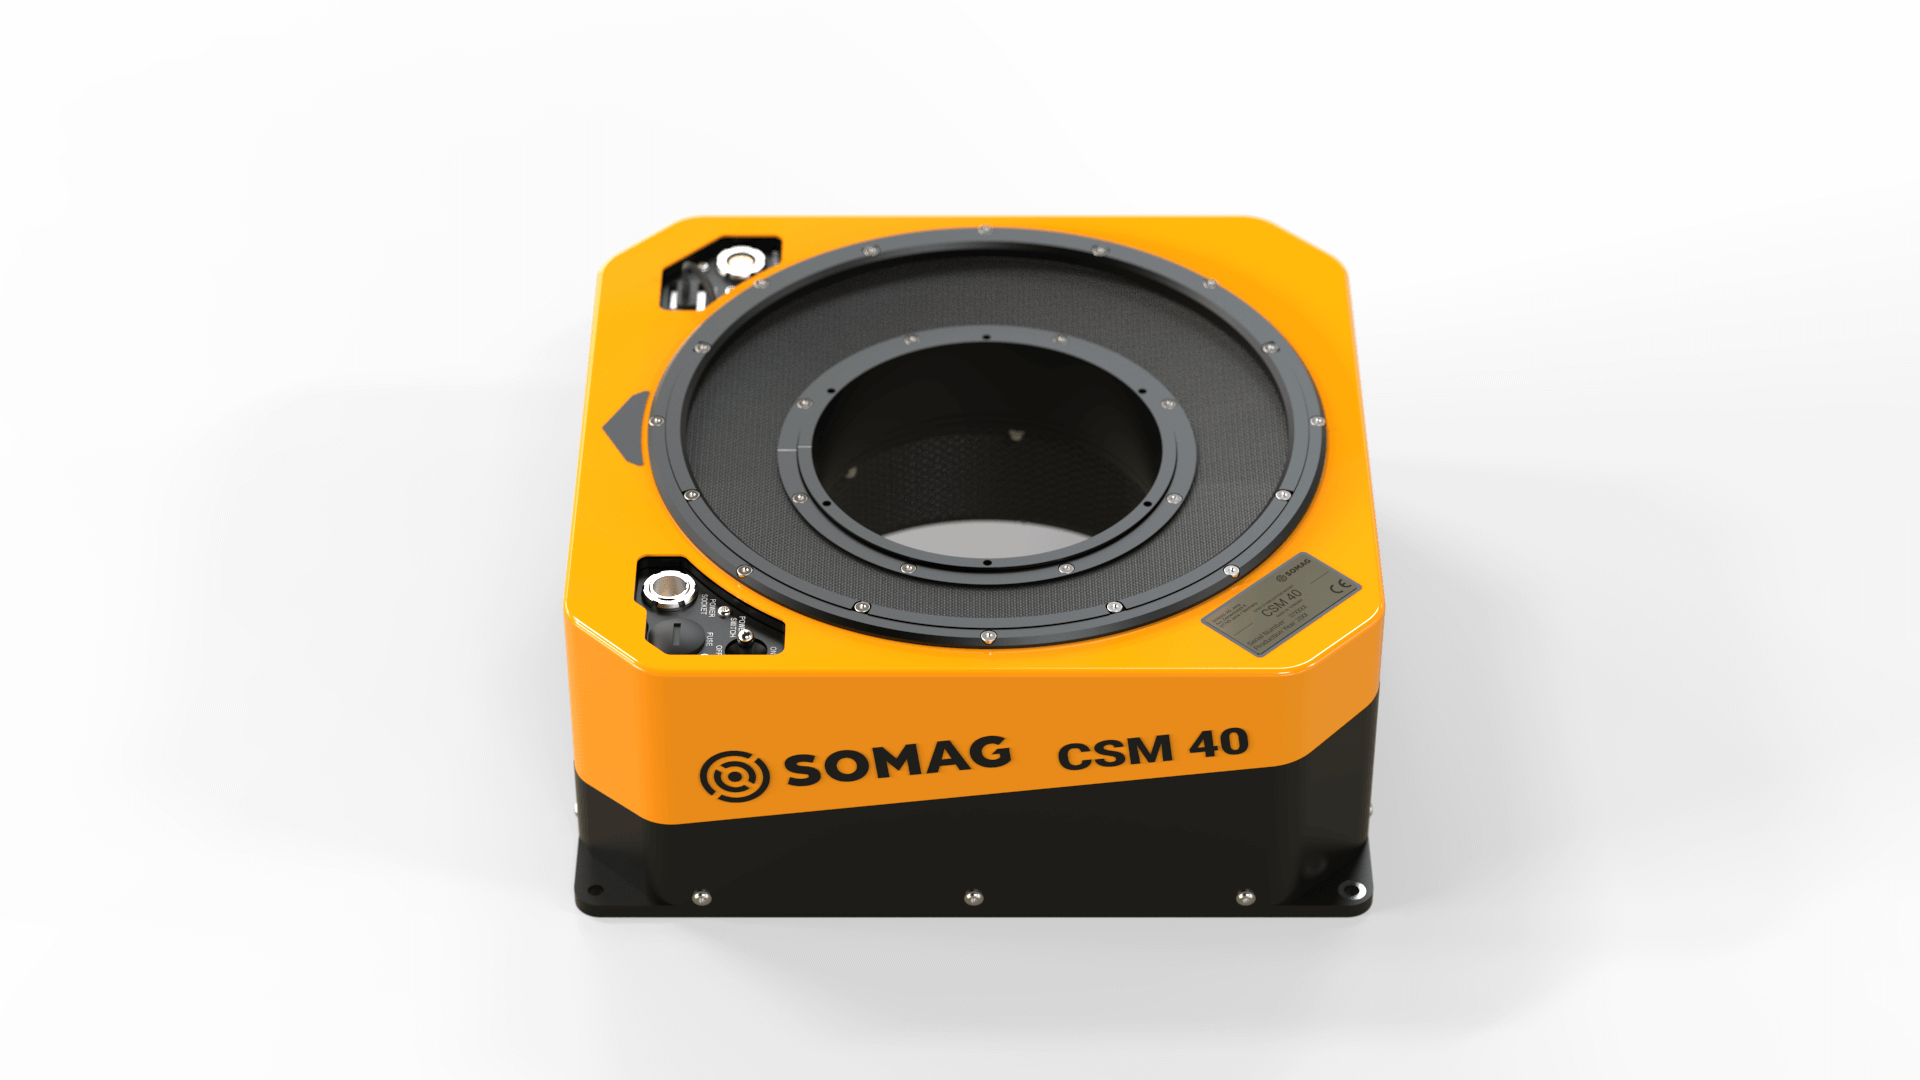 Small and Compact Stabilization Mount for airborne sensor systems